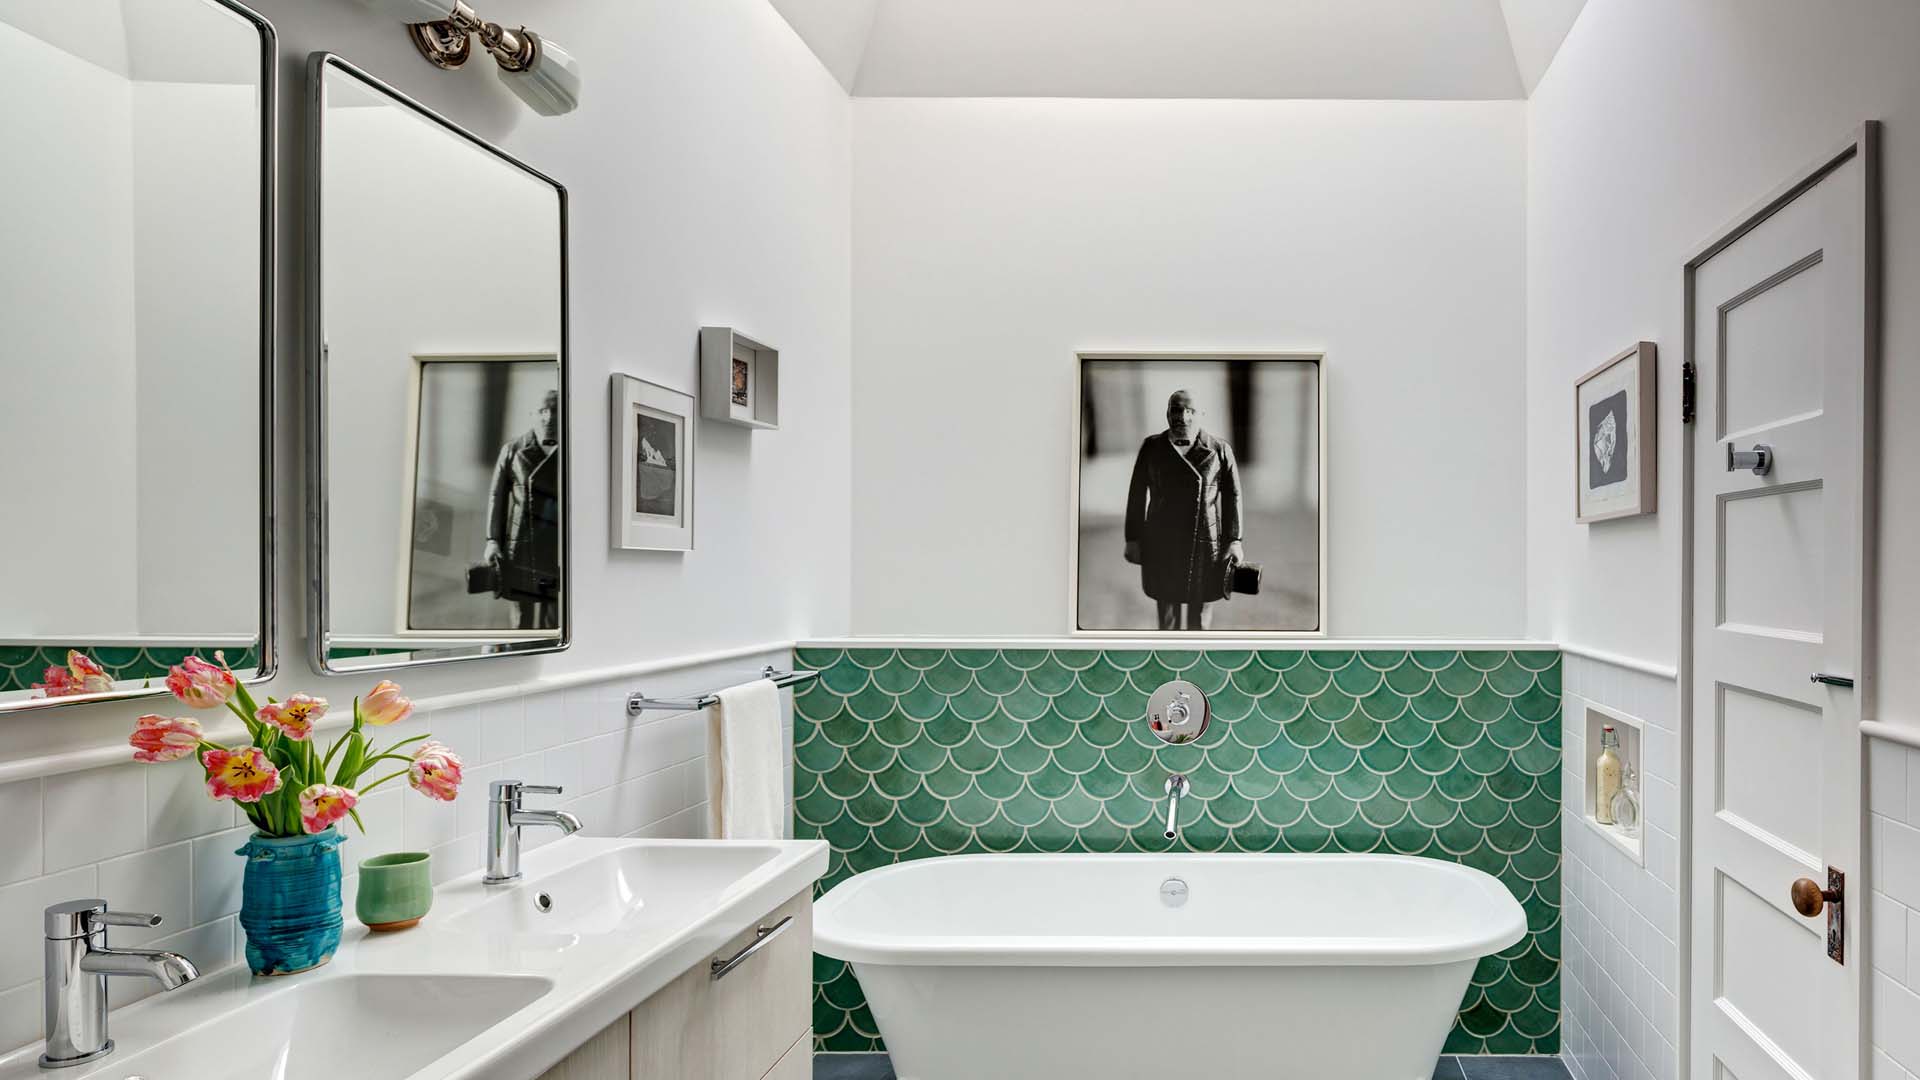 A bright bathroom with green feature tiling over the bathtub